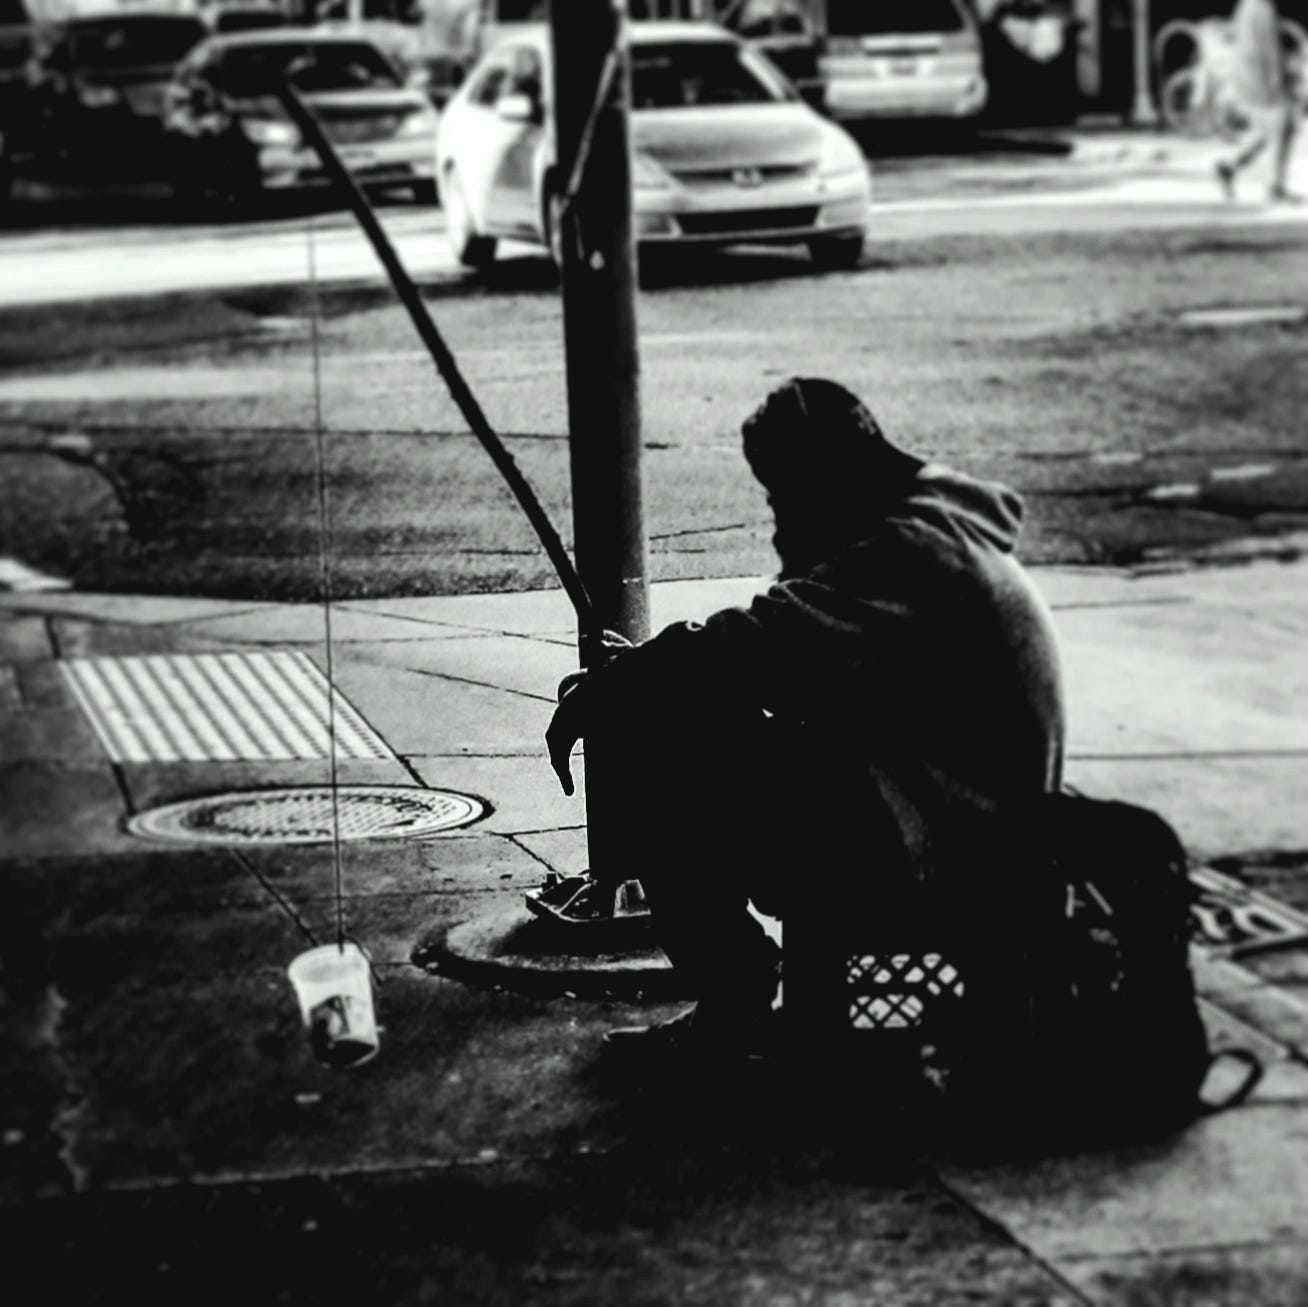 Homeless Man - Image by Shawn R. Metivier, 2017